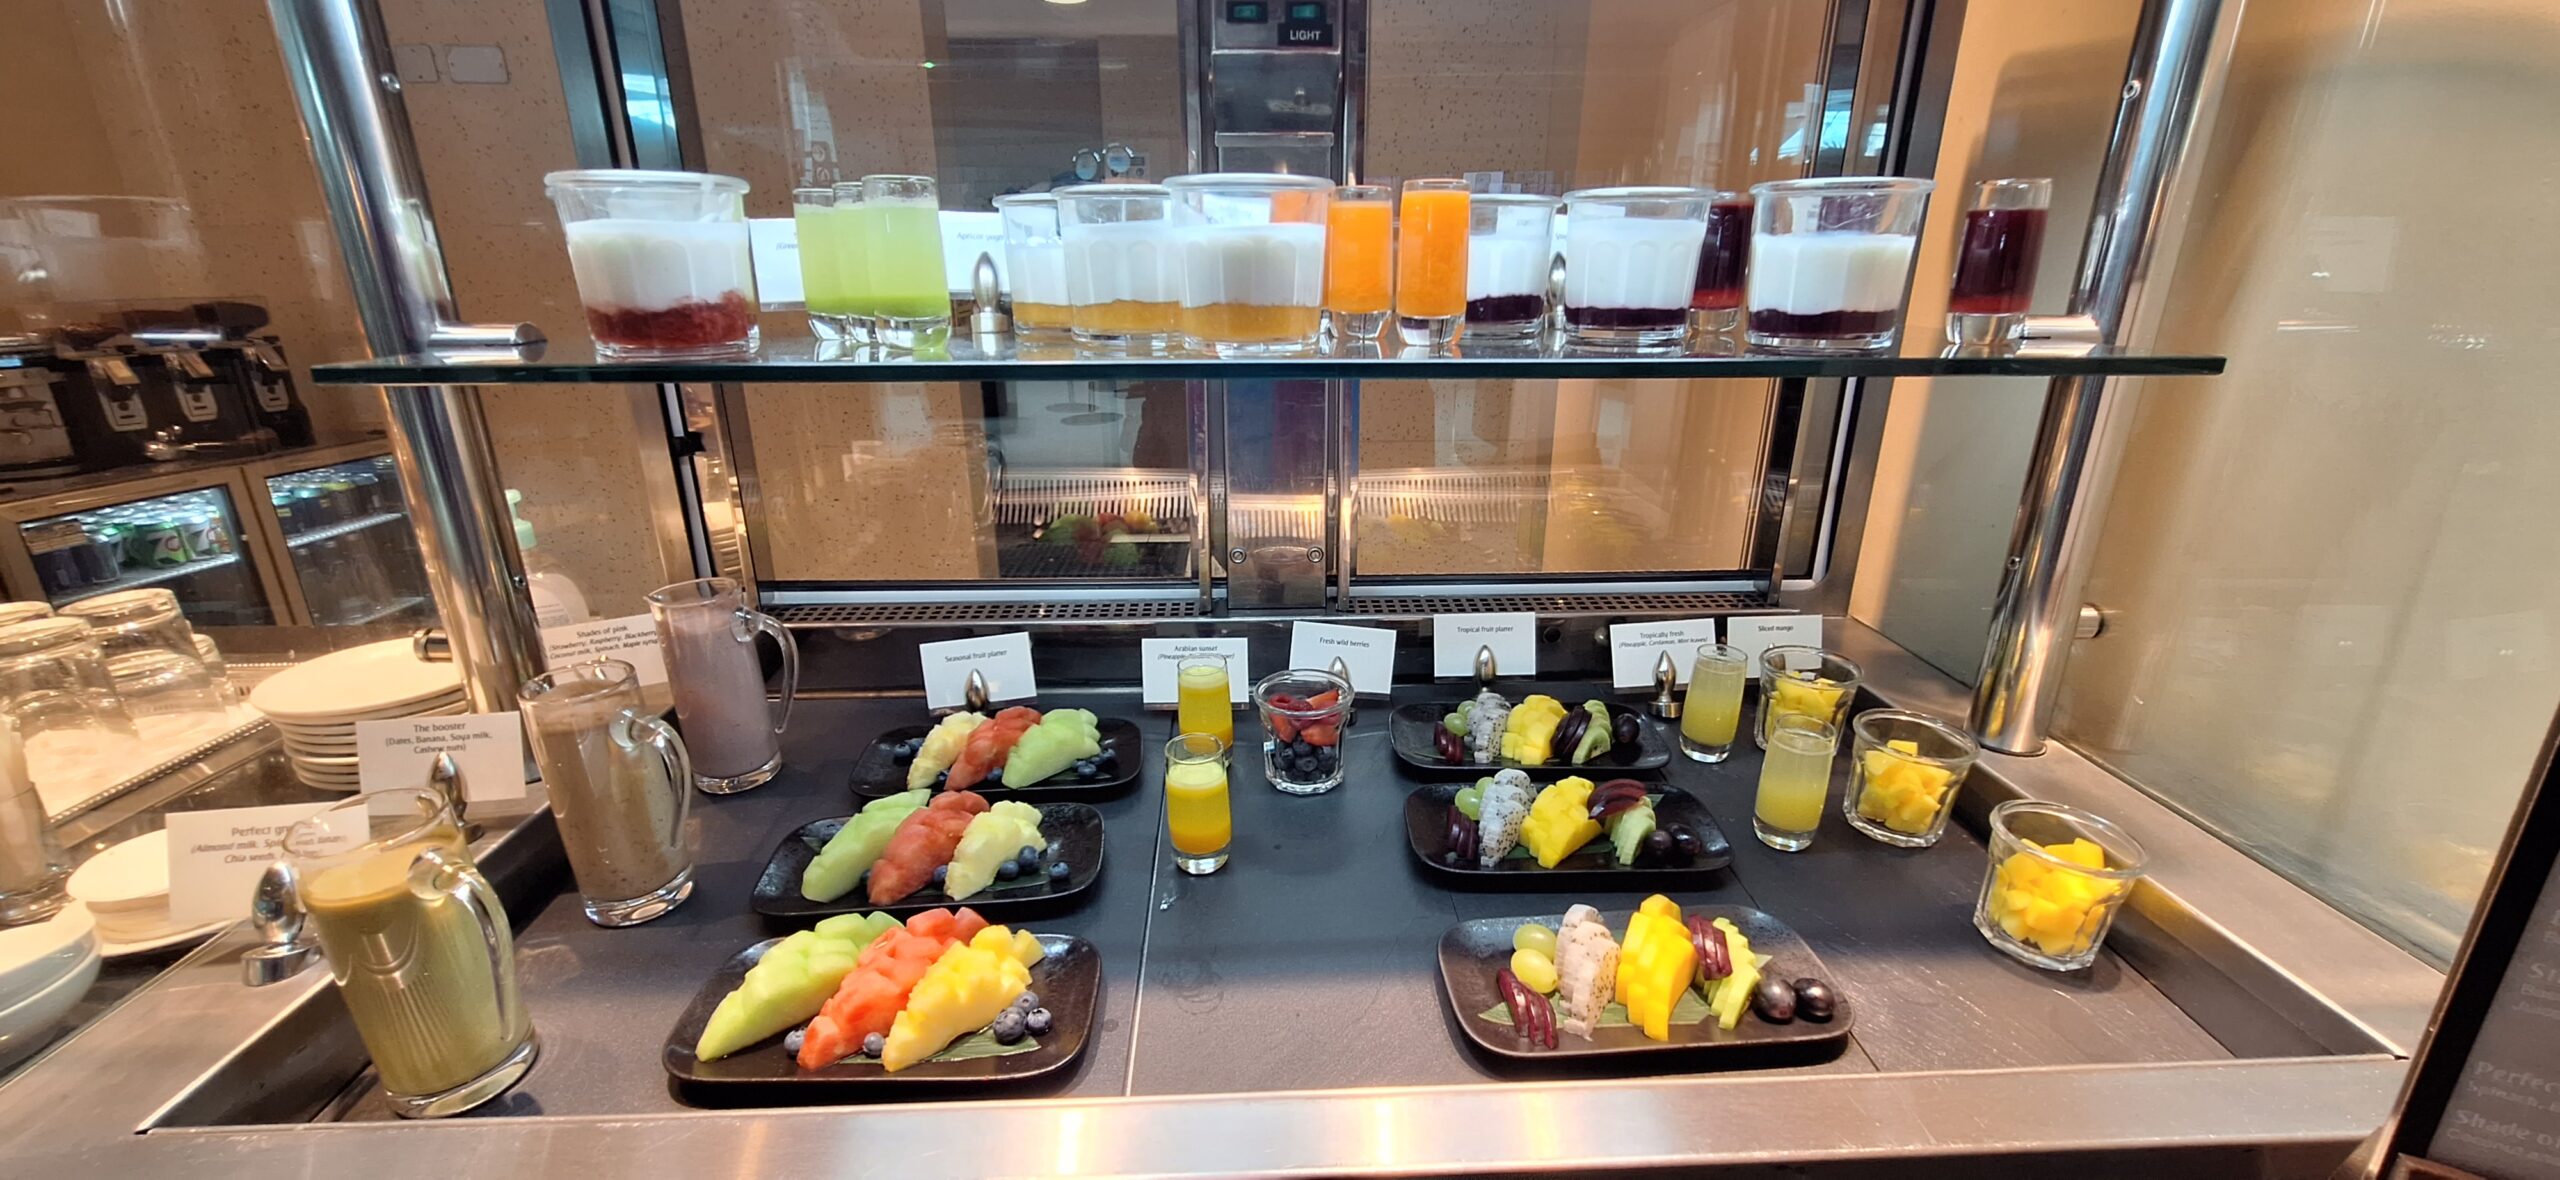 a display of different drinks on a counter